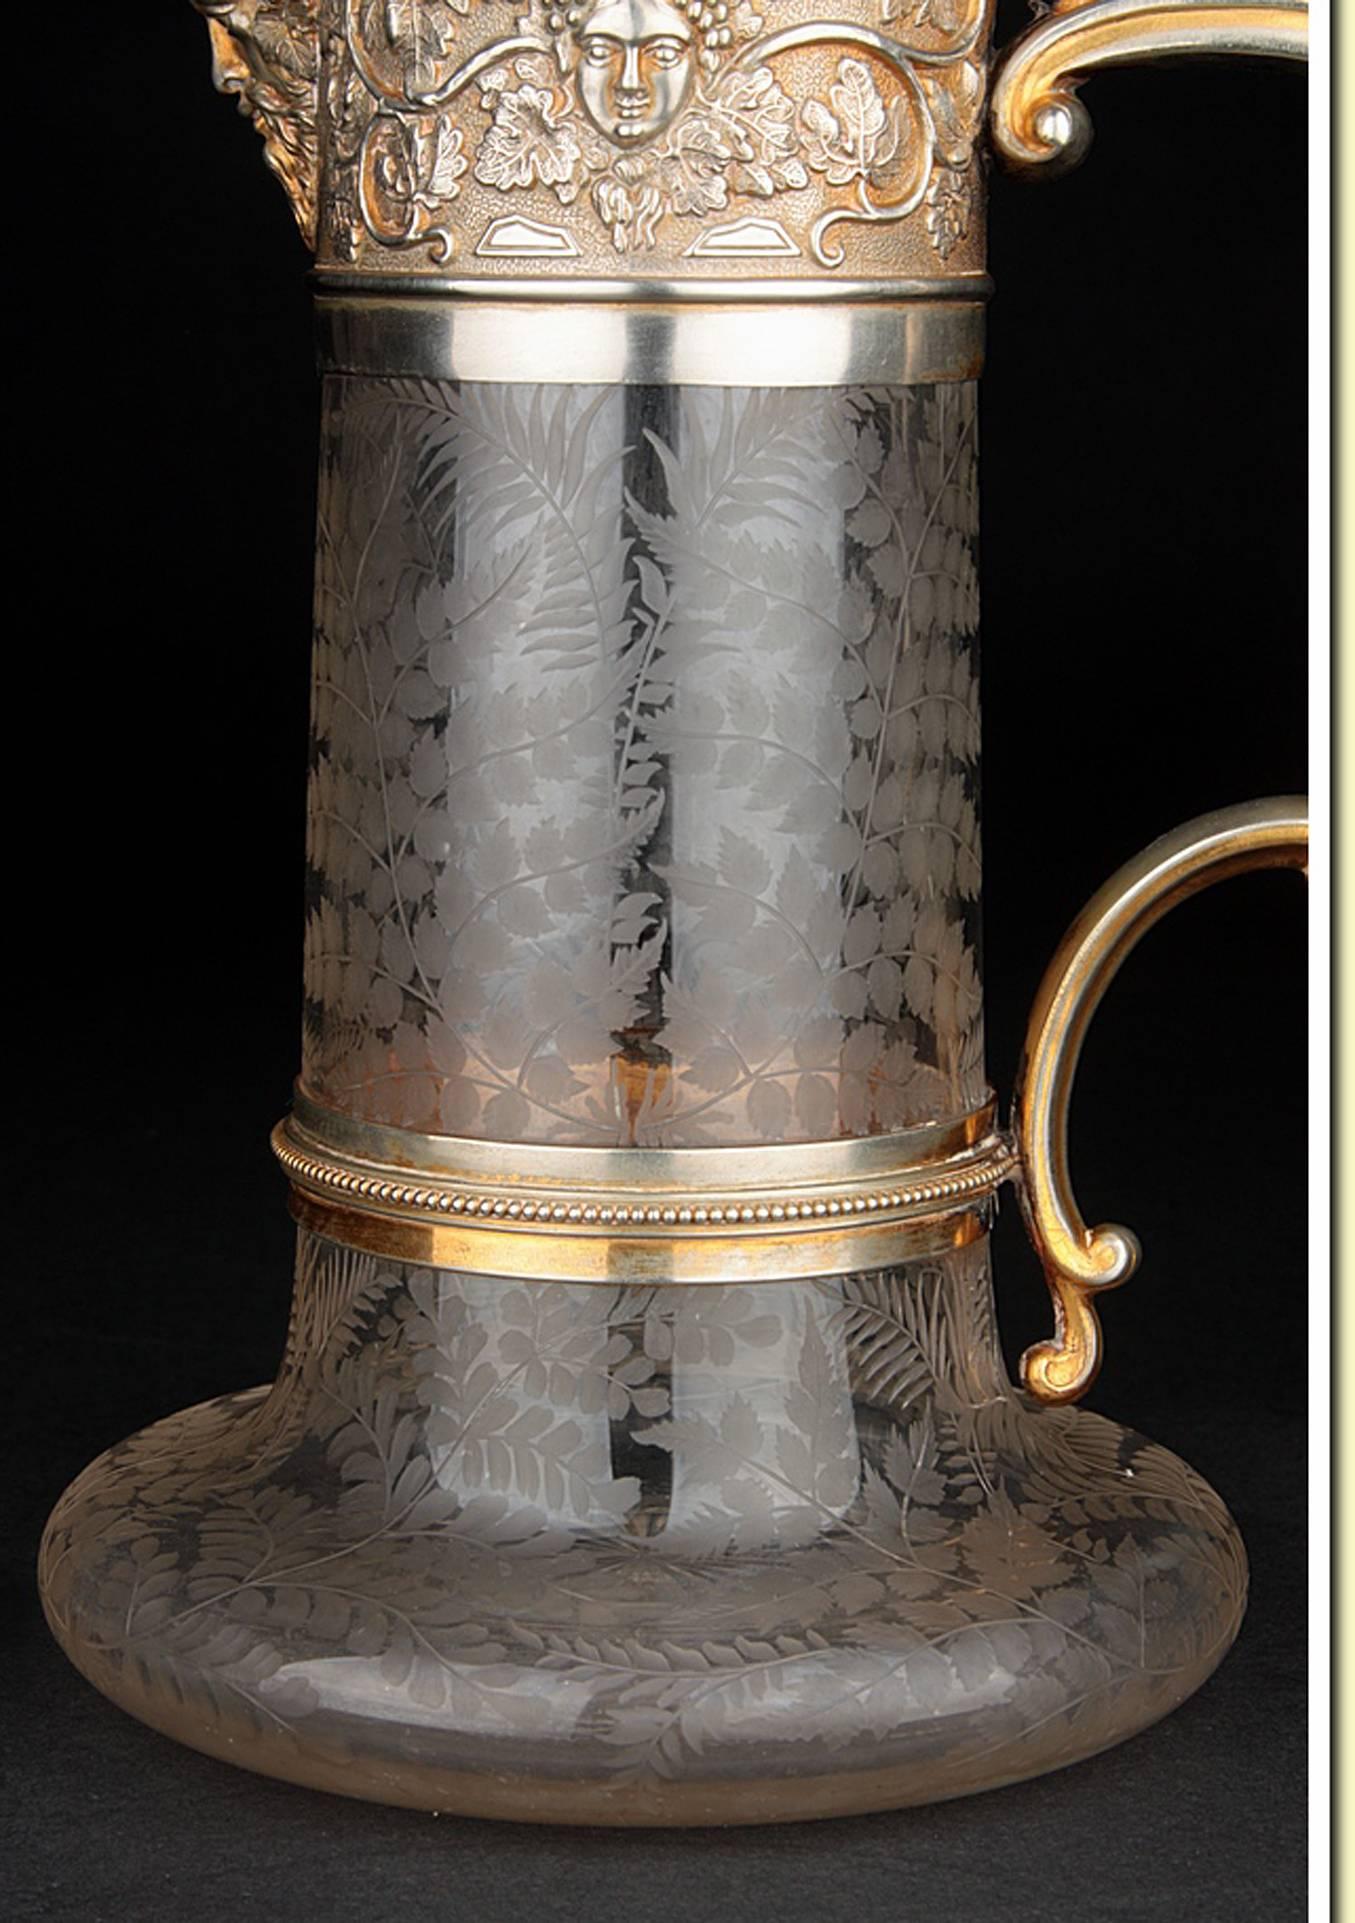 Beautiful brass and silver-plated pitcher from the mid-nineteenth century. With label
Elkington, Mason & Co.
Intricately engraved glass.